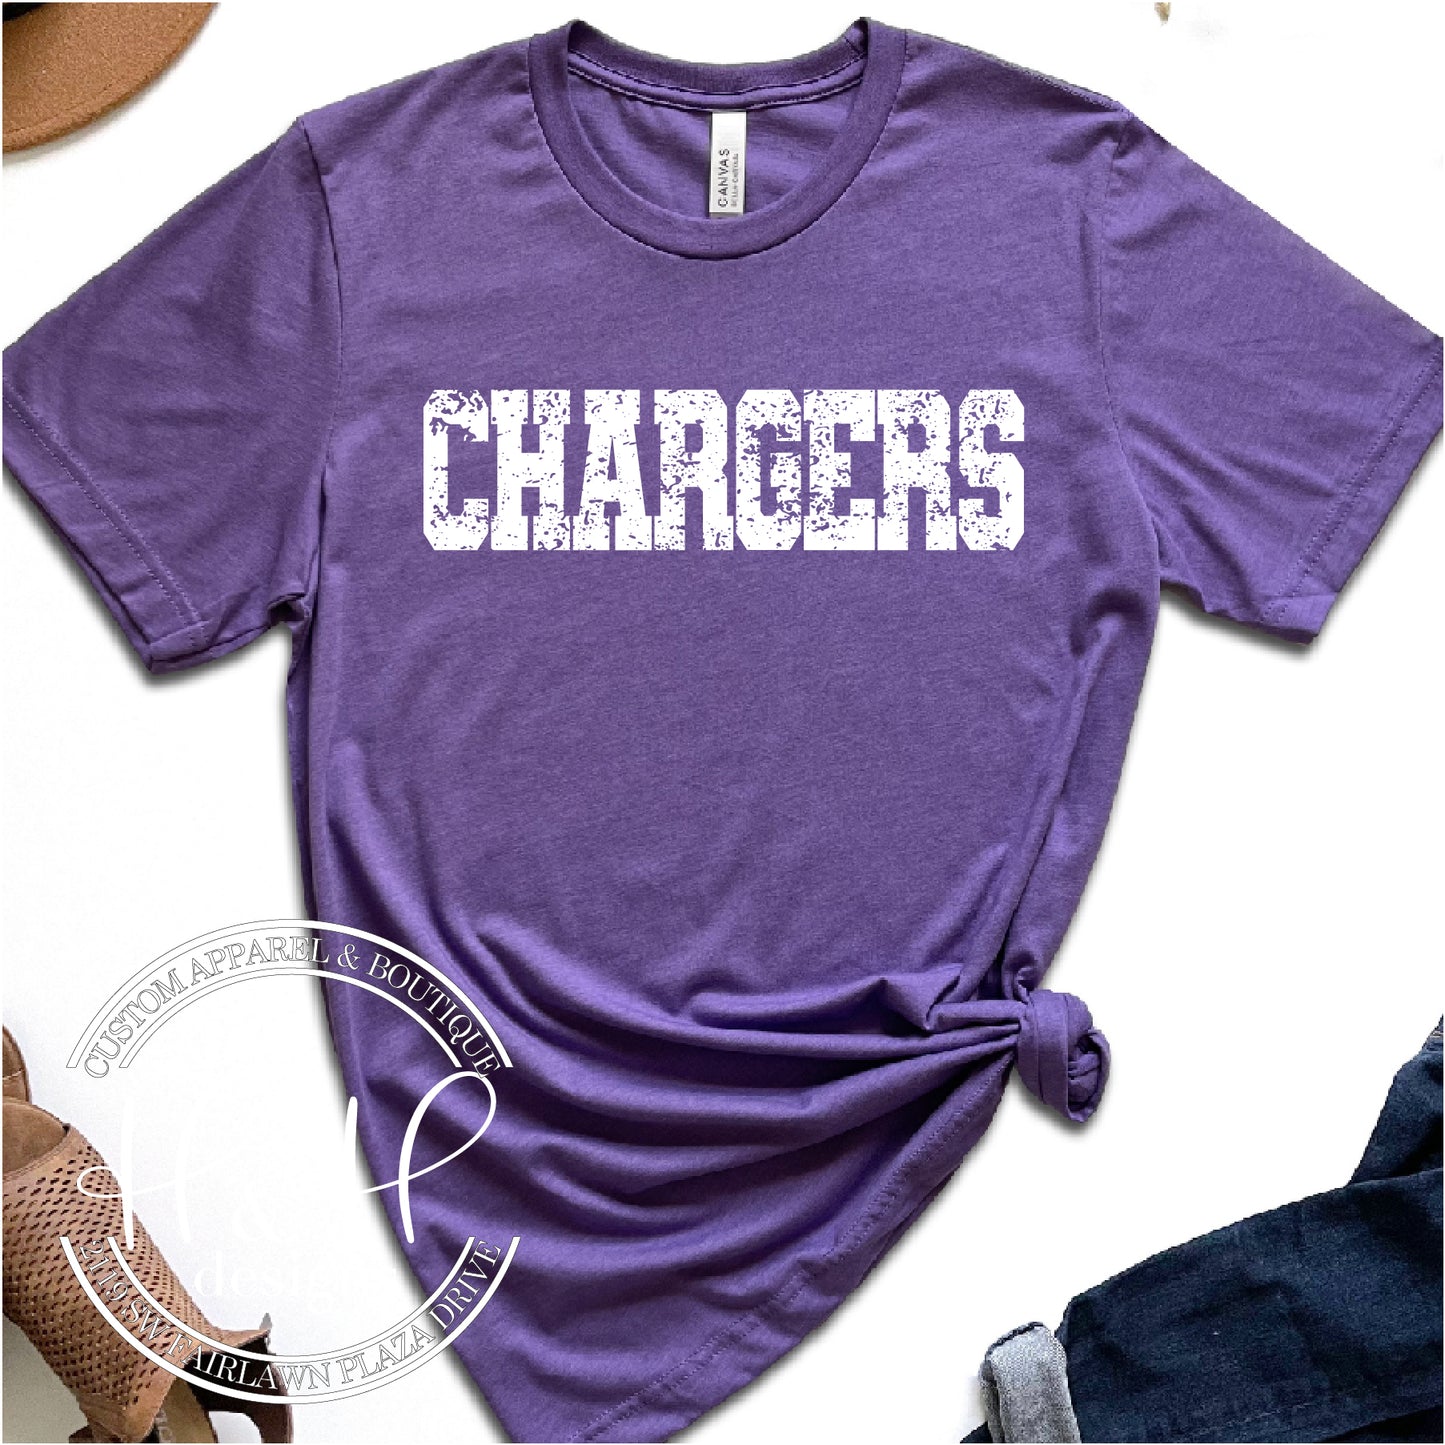 Chargers Distressed Block - Topeka West Official Spirit Wear!